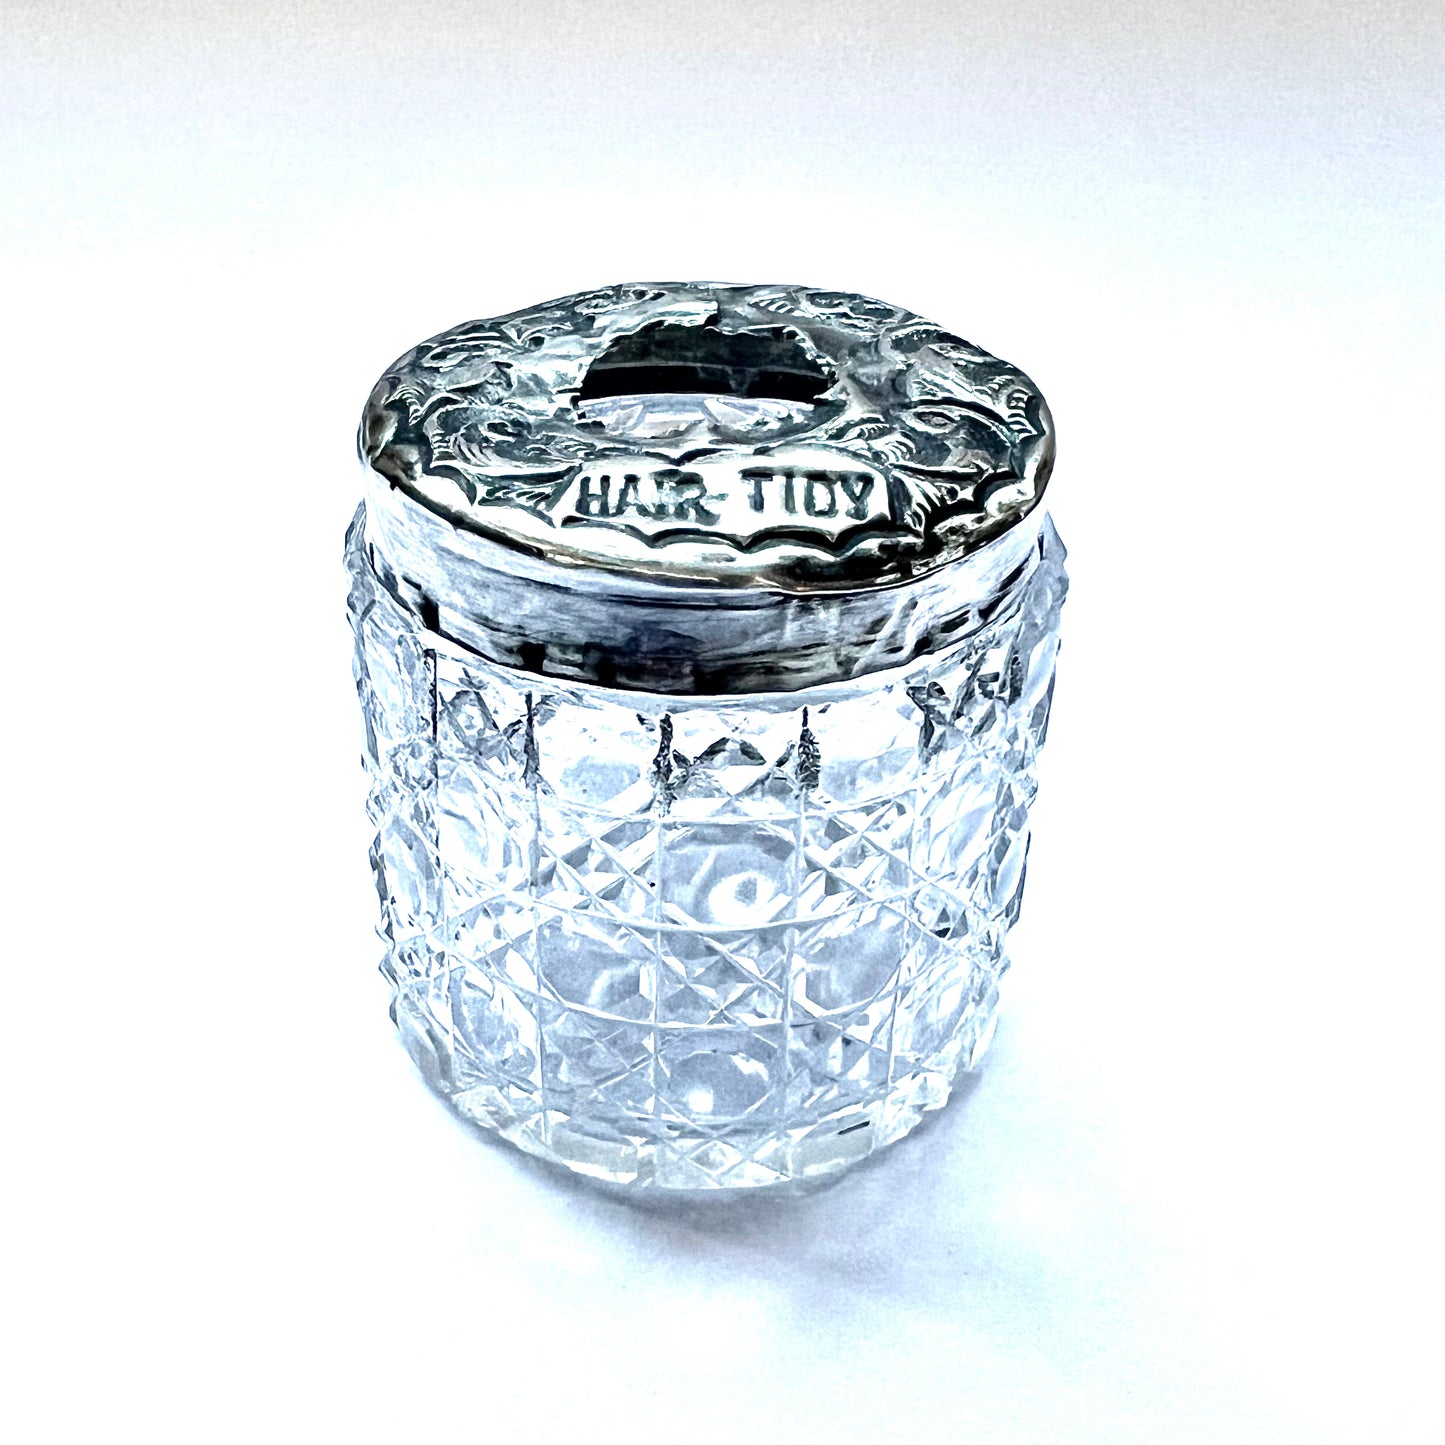 Antique sterling silver and crystal hair tidy, keeper or receiver circa London, 1907